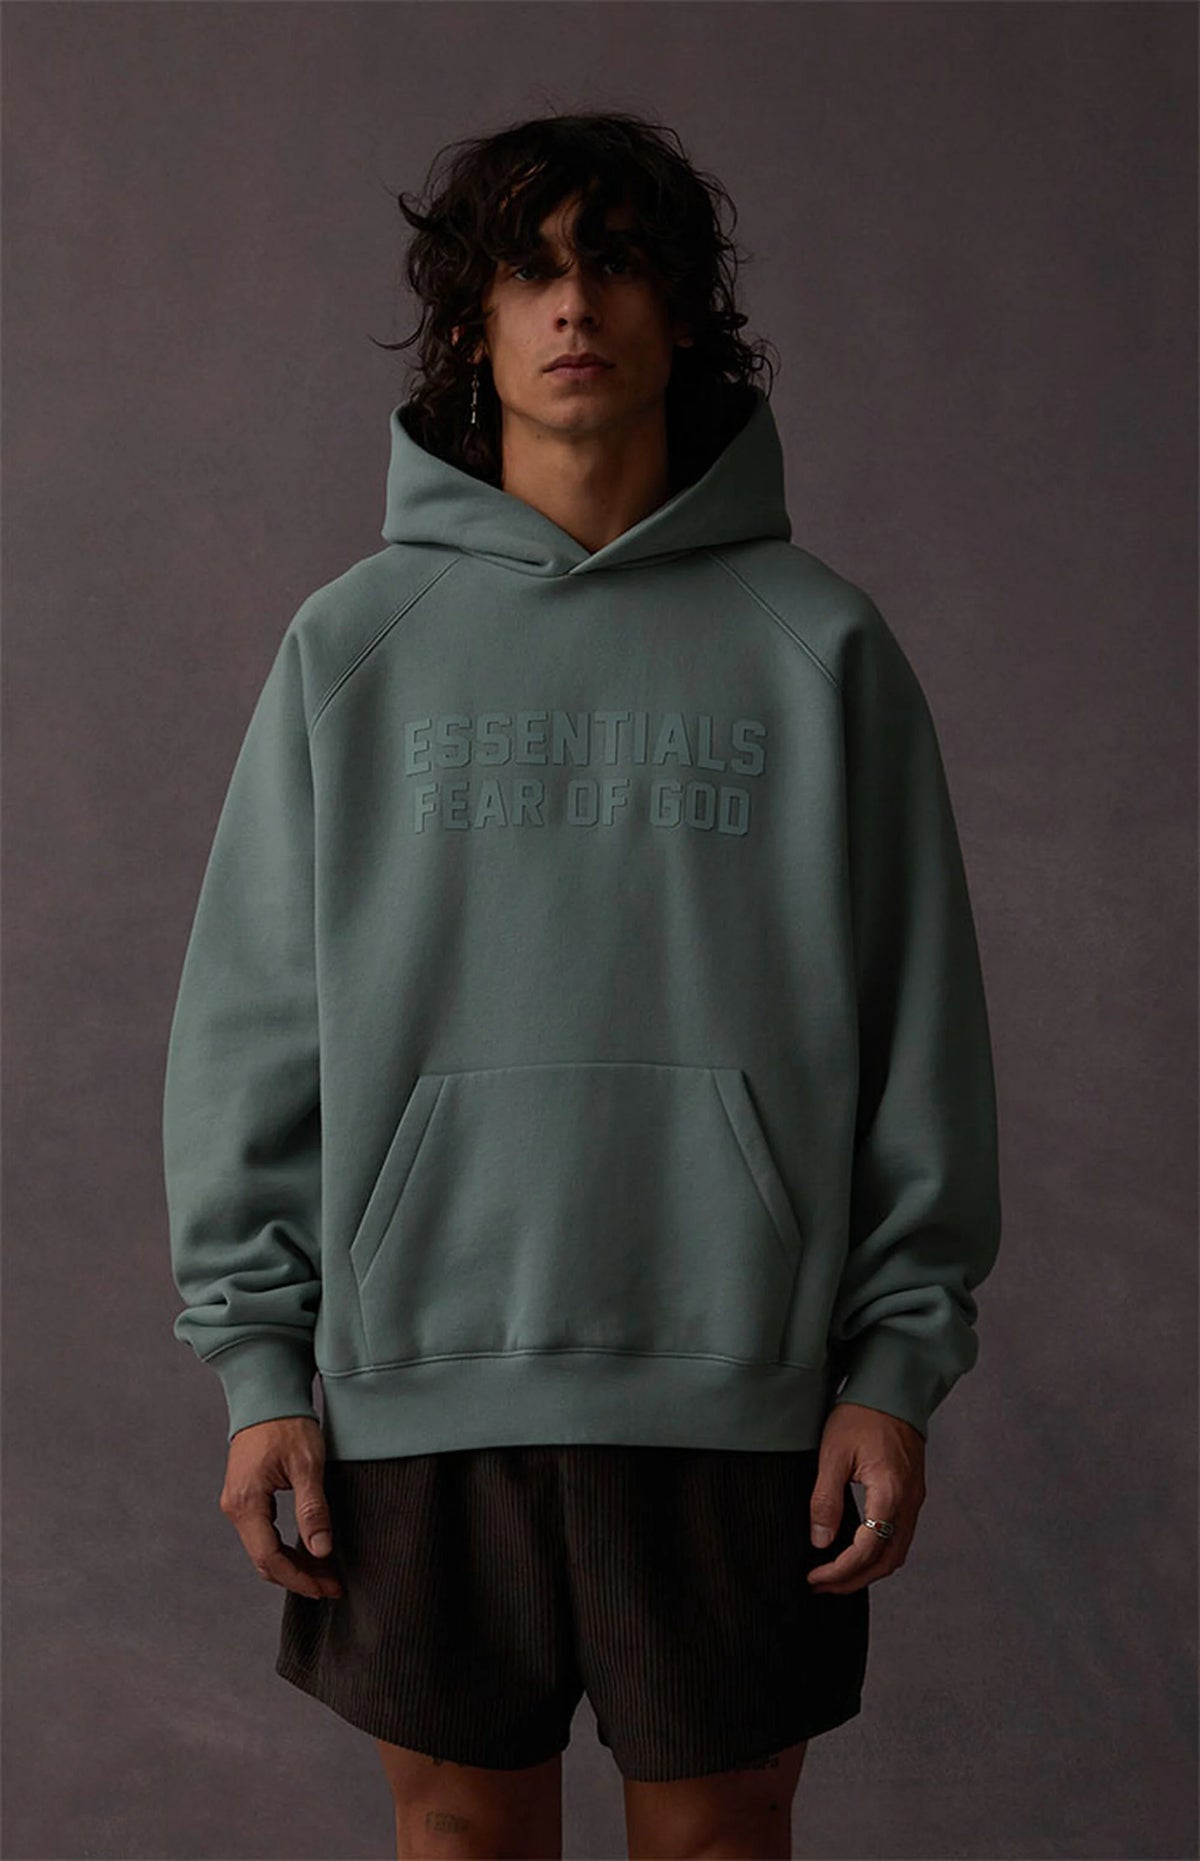 Essentials Fear Of God Sycamore Hoodie